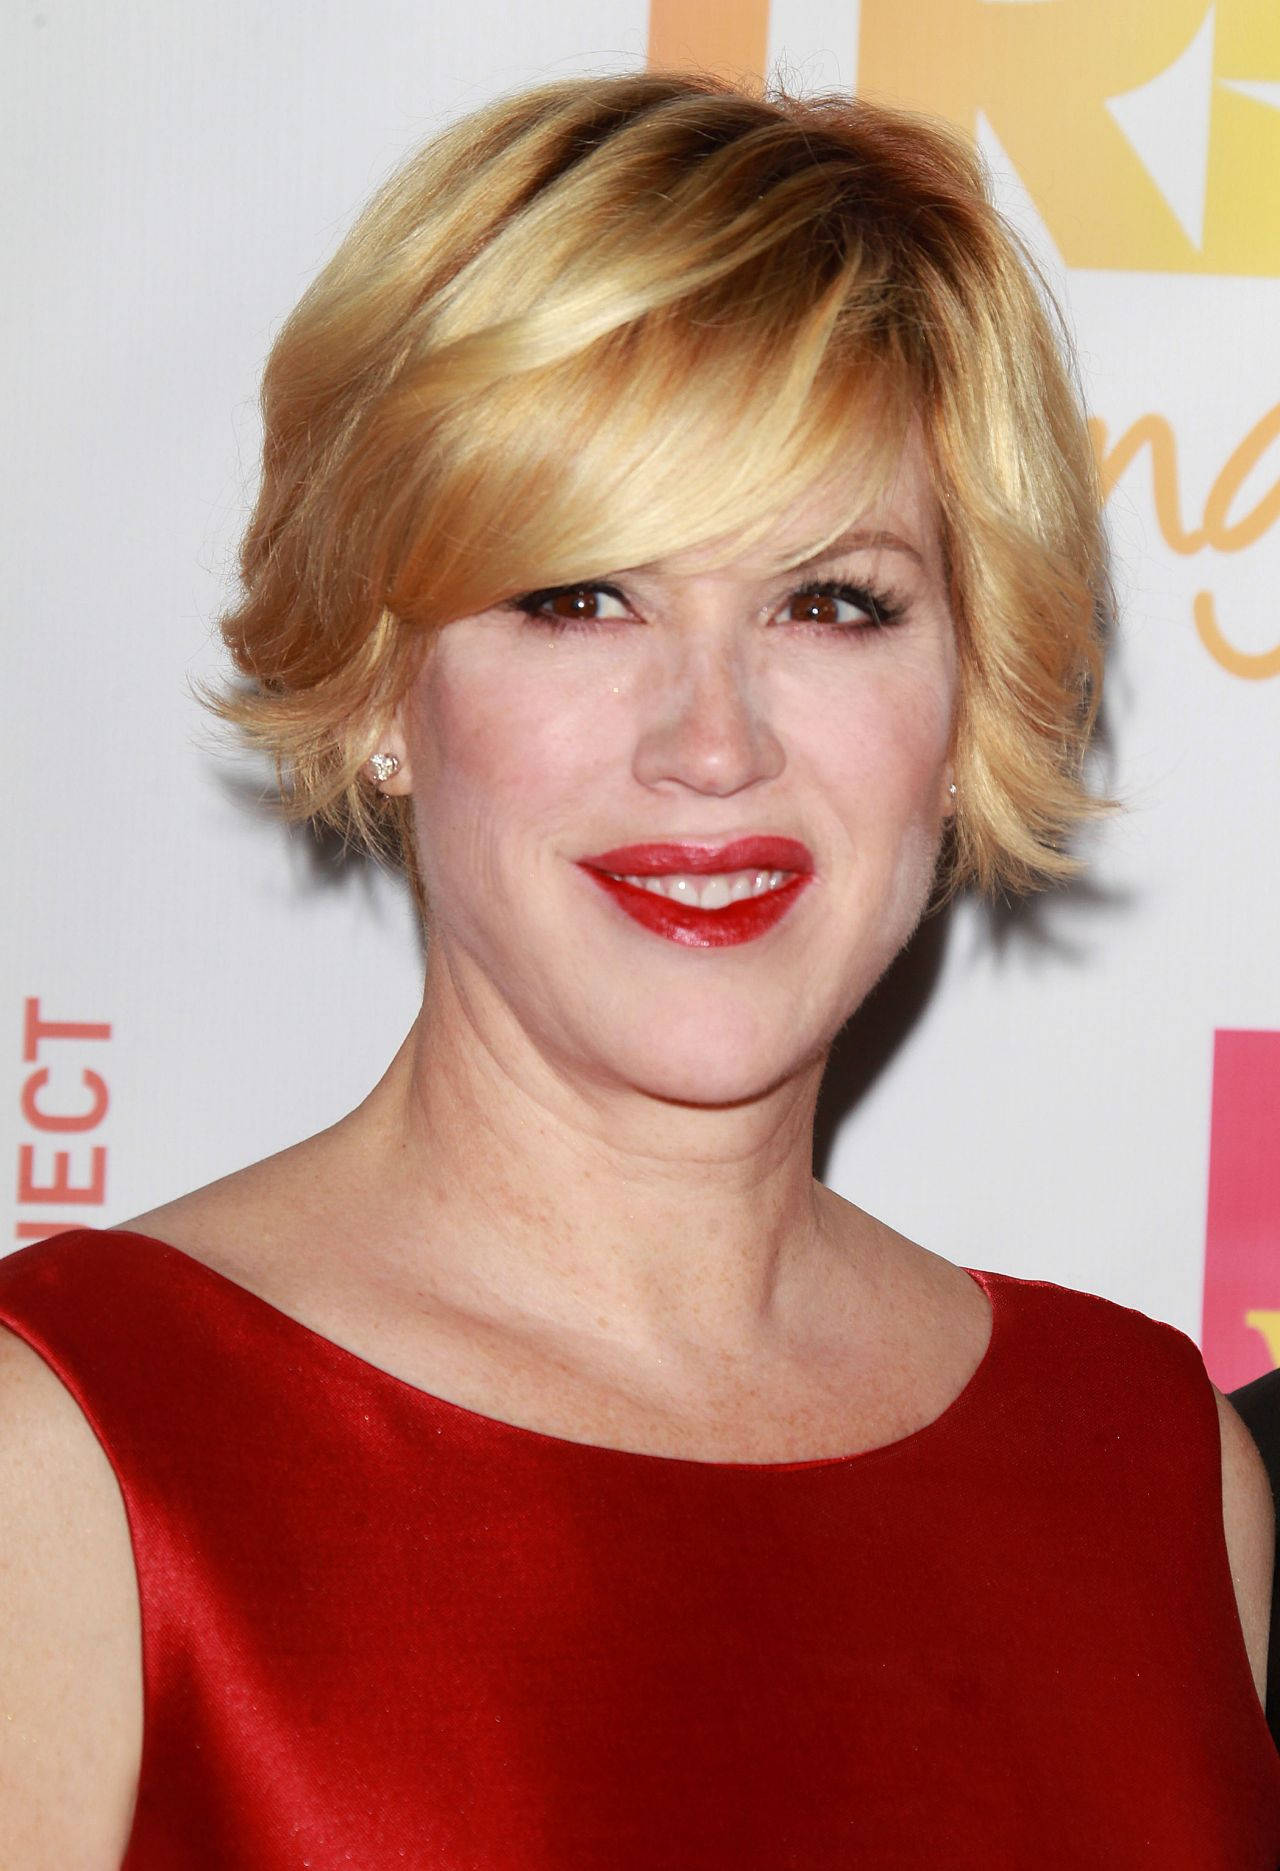 Molly Ringwald rocking a funky hairstyle Wallpaper